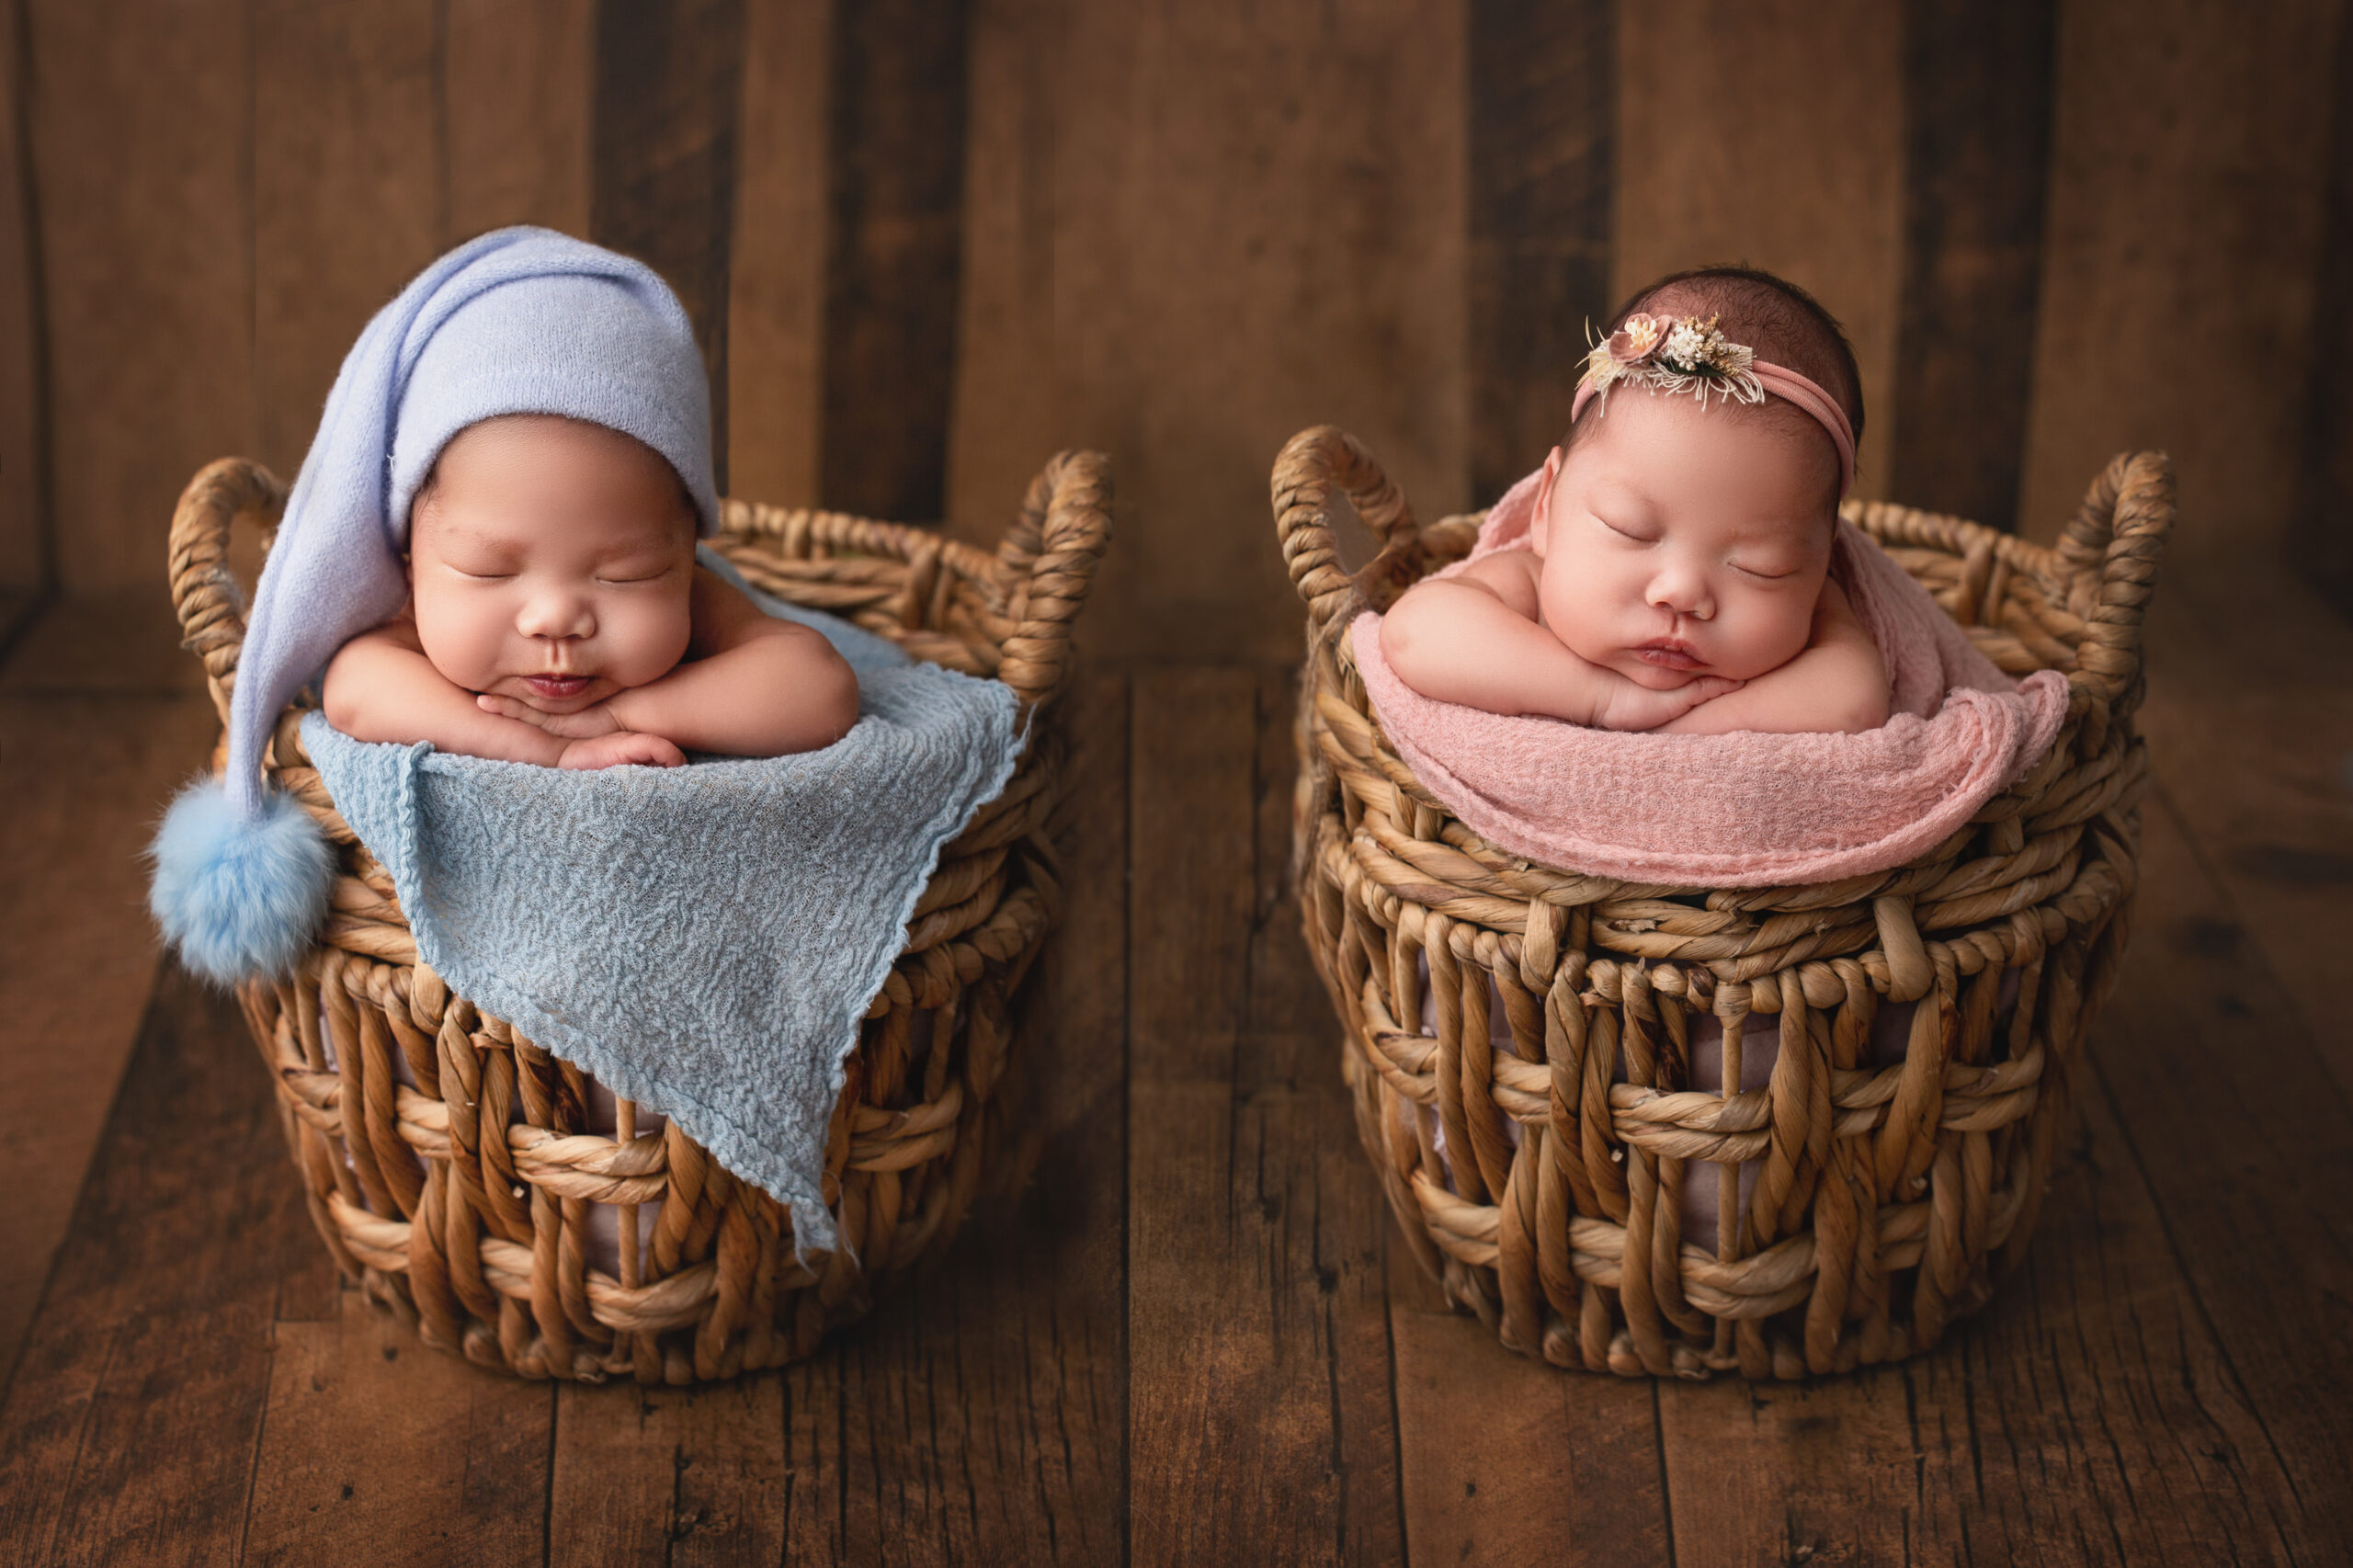 toronto baby store uses portrait of twin babies for local advertisement